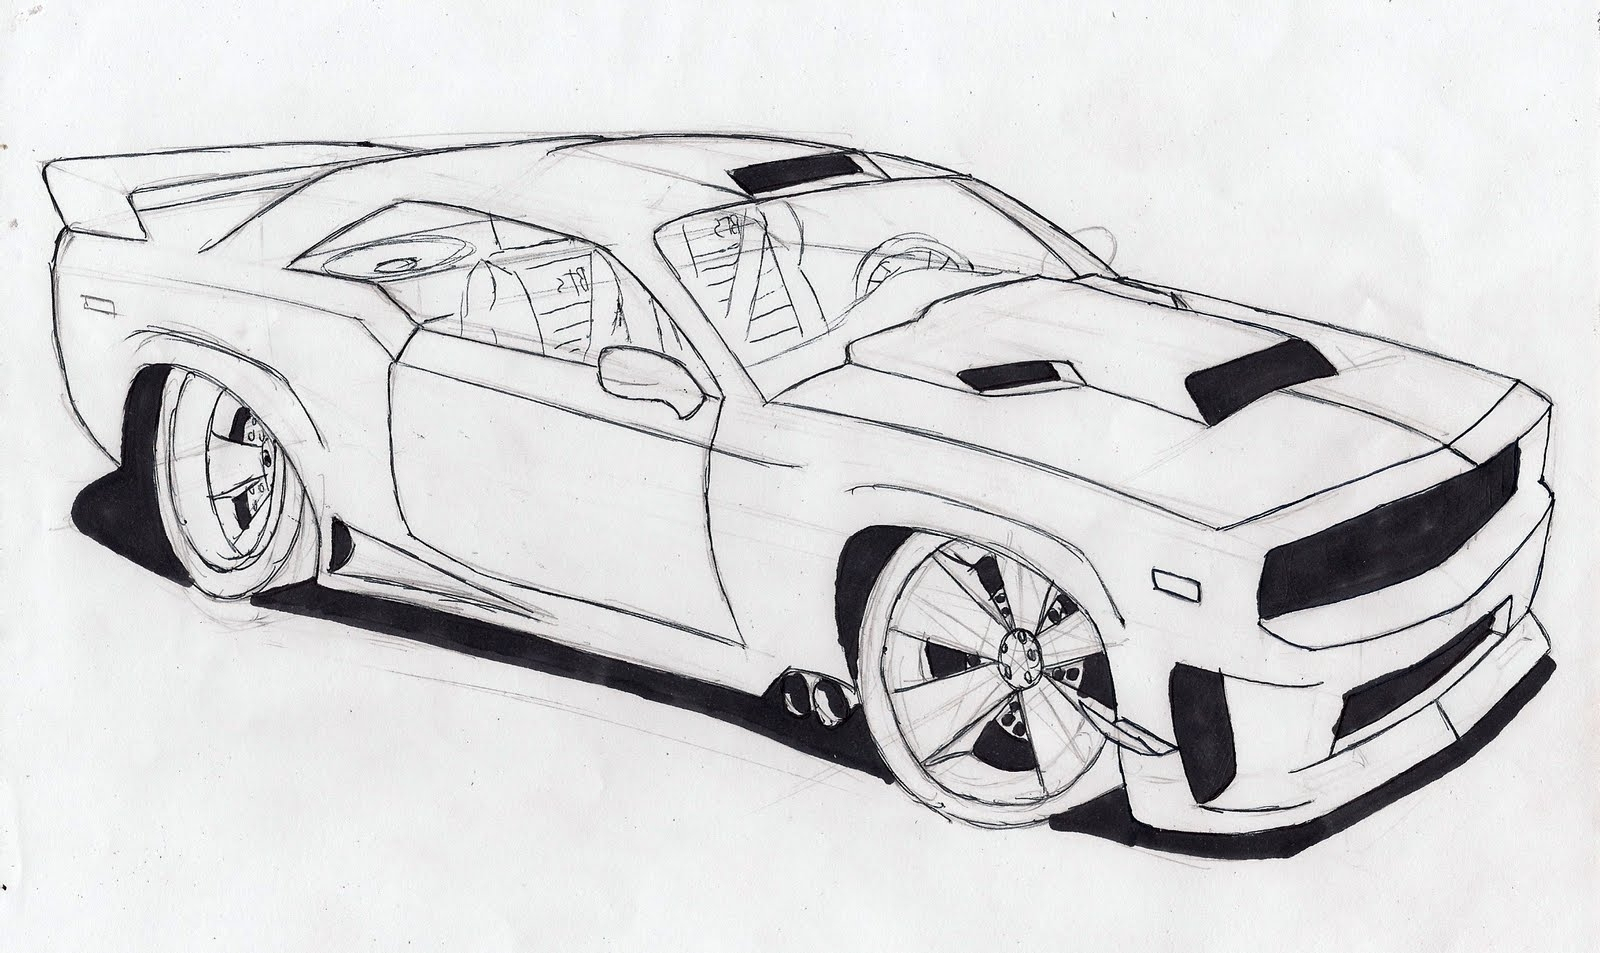 3d Sketch Of A Car at PaintingValley.com | Explore collection of 3d ...